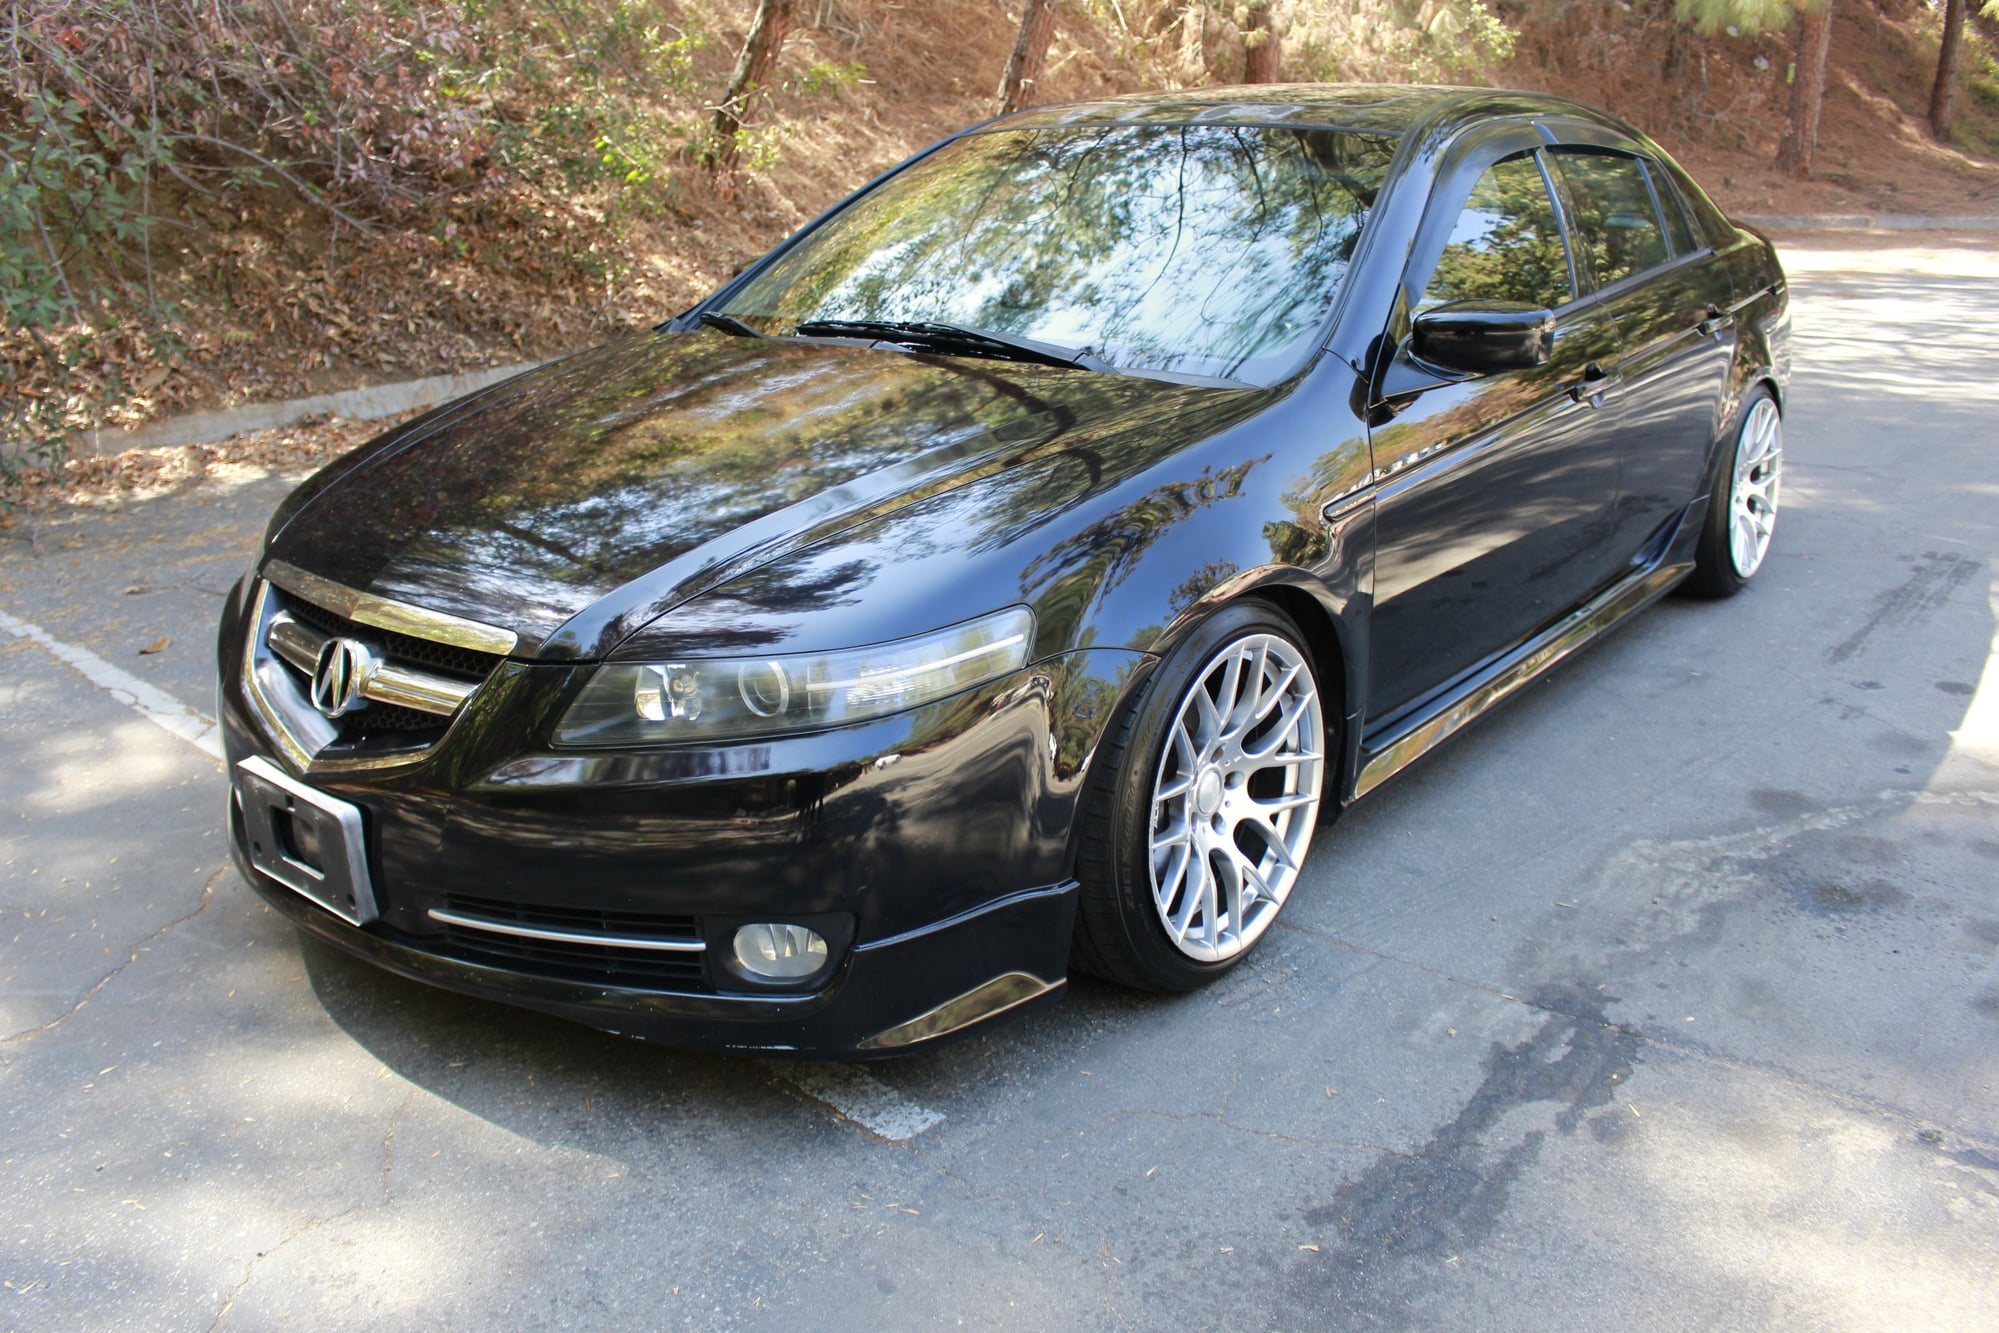 2005 Acura TL - FS:2005 Acura TL 6-Speed MT with Navi Brembo Brakes 07-08 Facelift,ATLP Exhaust, etc. - Used - VIN 19UUA65675A044997 - 201,730 Miles - 6 cyl - 2WD - Manual - Sedan - Black - Los Angeles, CA 90041, United States